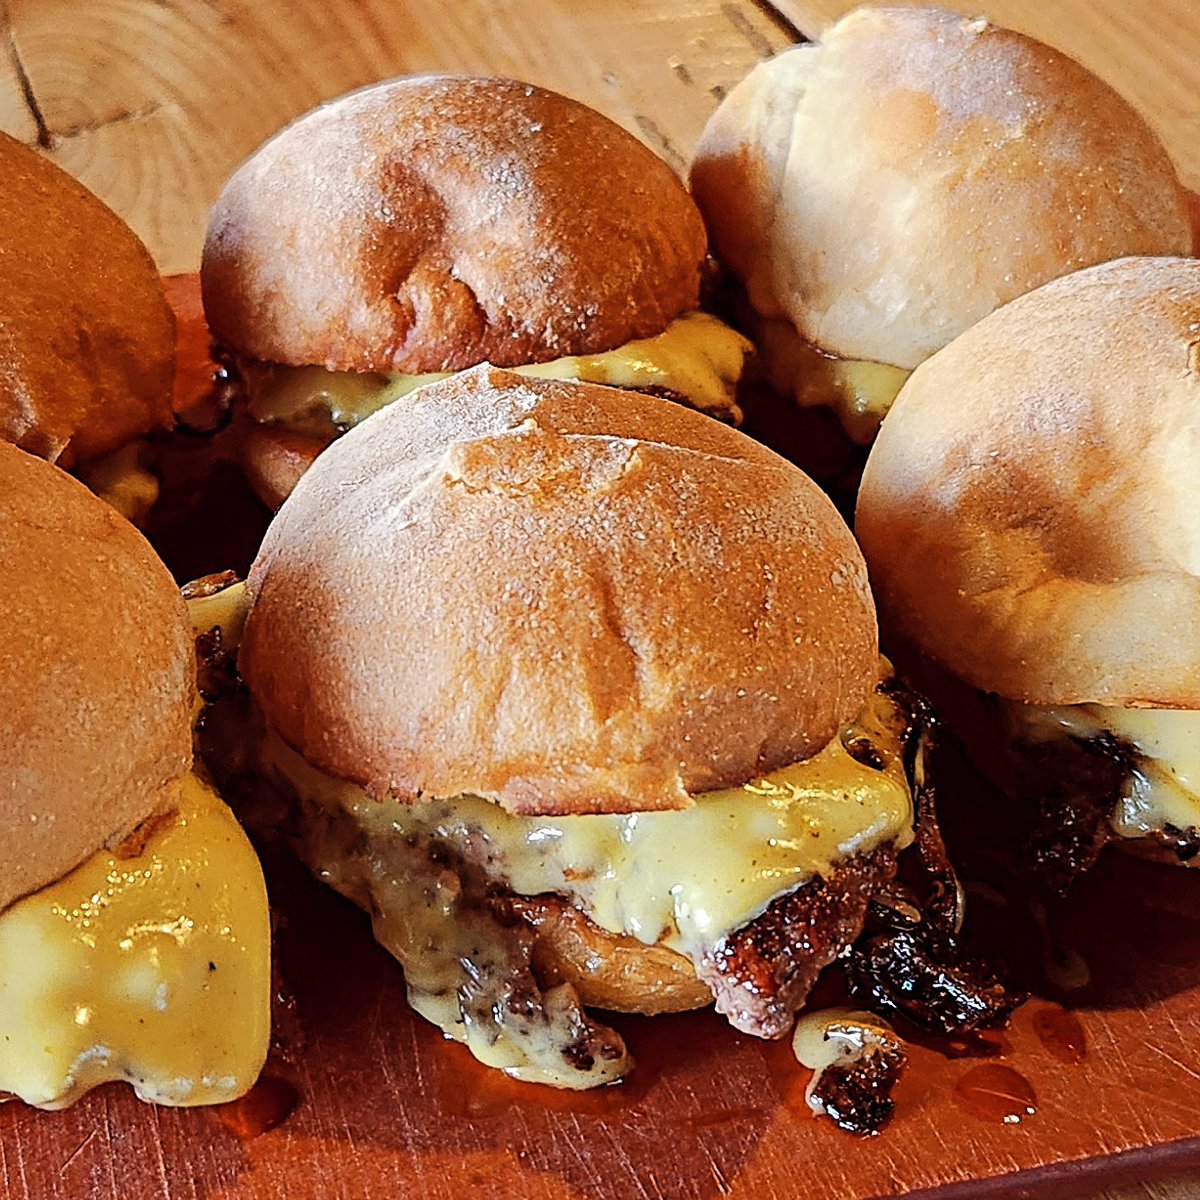 Get to the Georgetown Taproom for the May Burger of the Month! This month is the Oklahoma Fried Onion Sliders. These mini smash burgers are covered in fried onions and cheese on a buttered bun to pair perfectly with your favorite Country Boy brew.